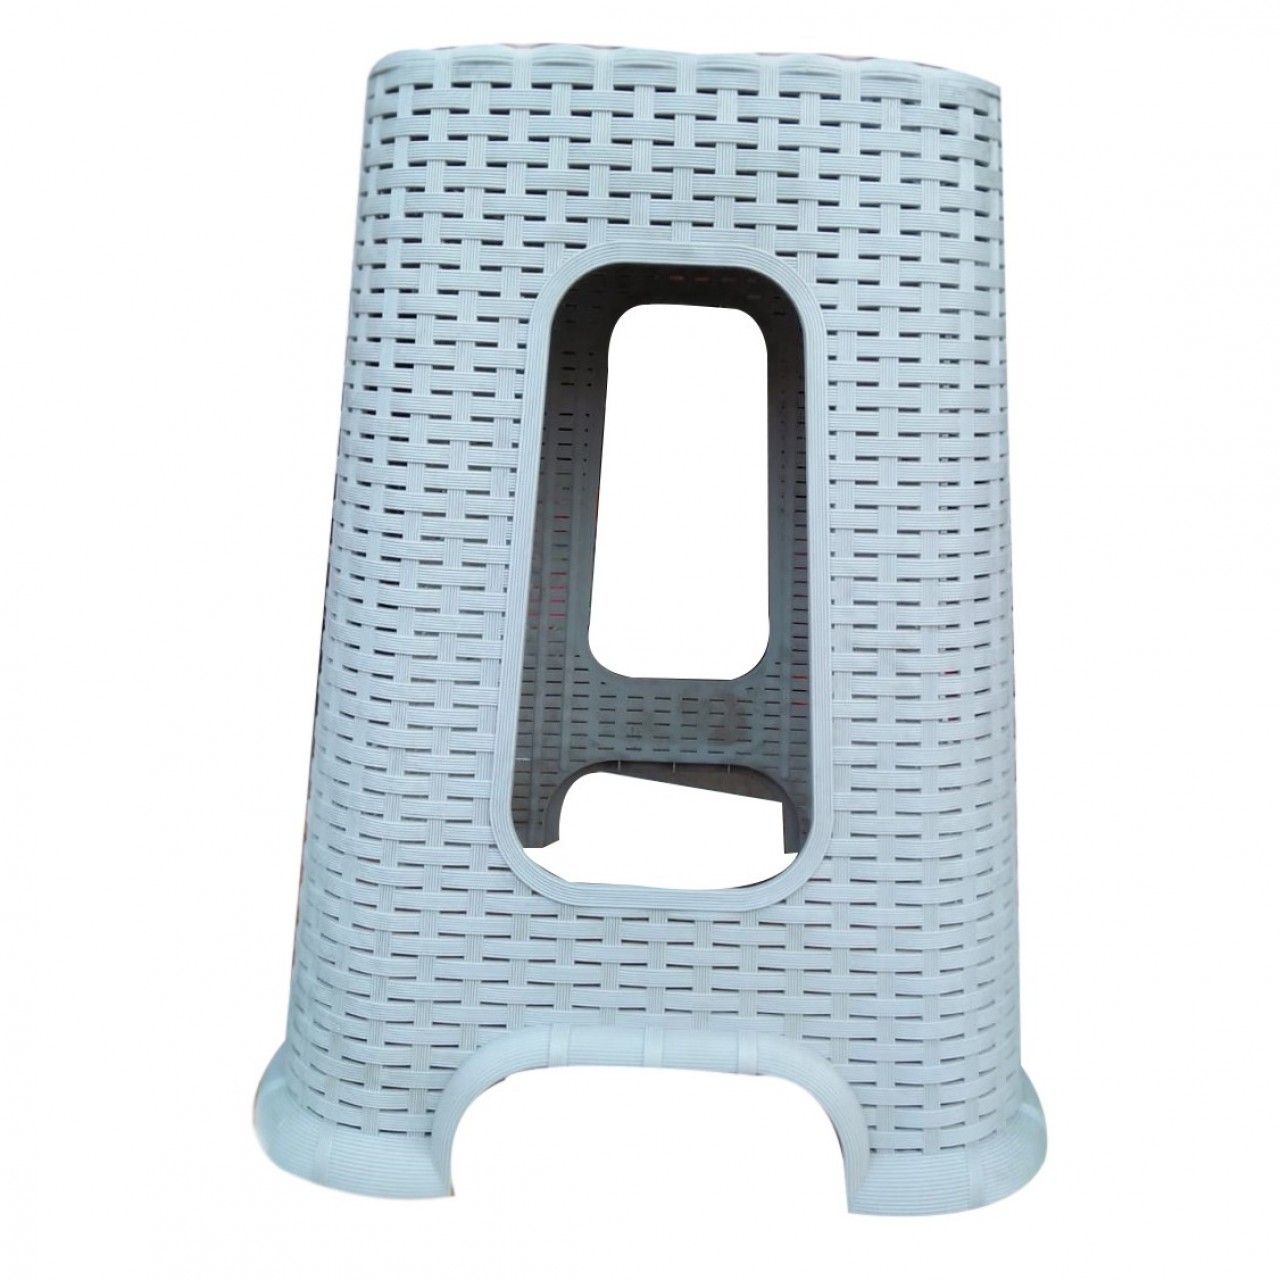 Regular Sitting Stool With Square Sitting Top